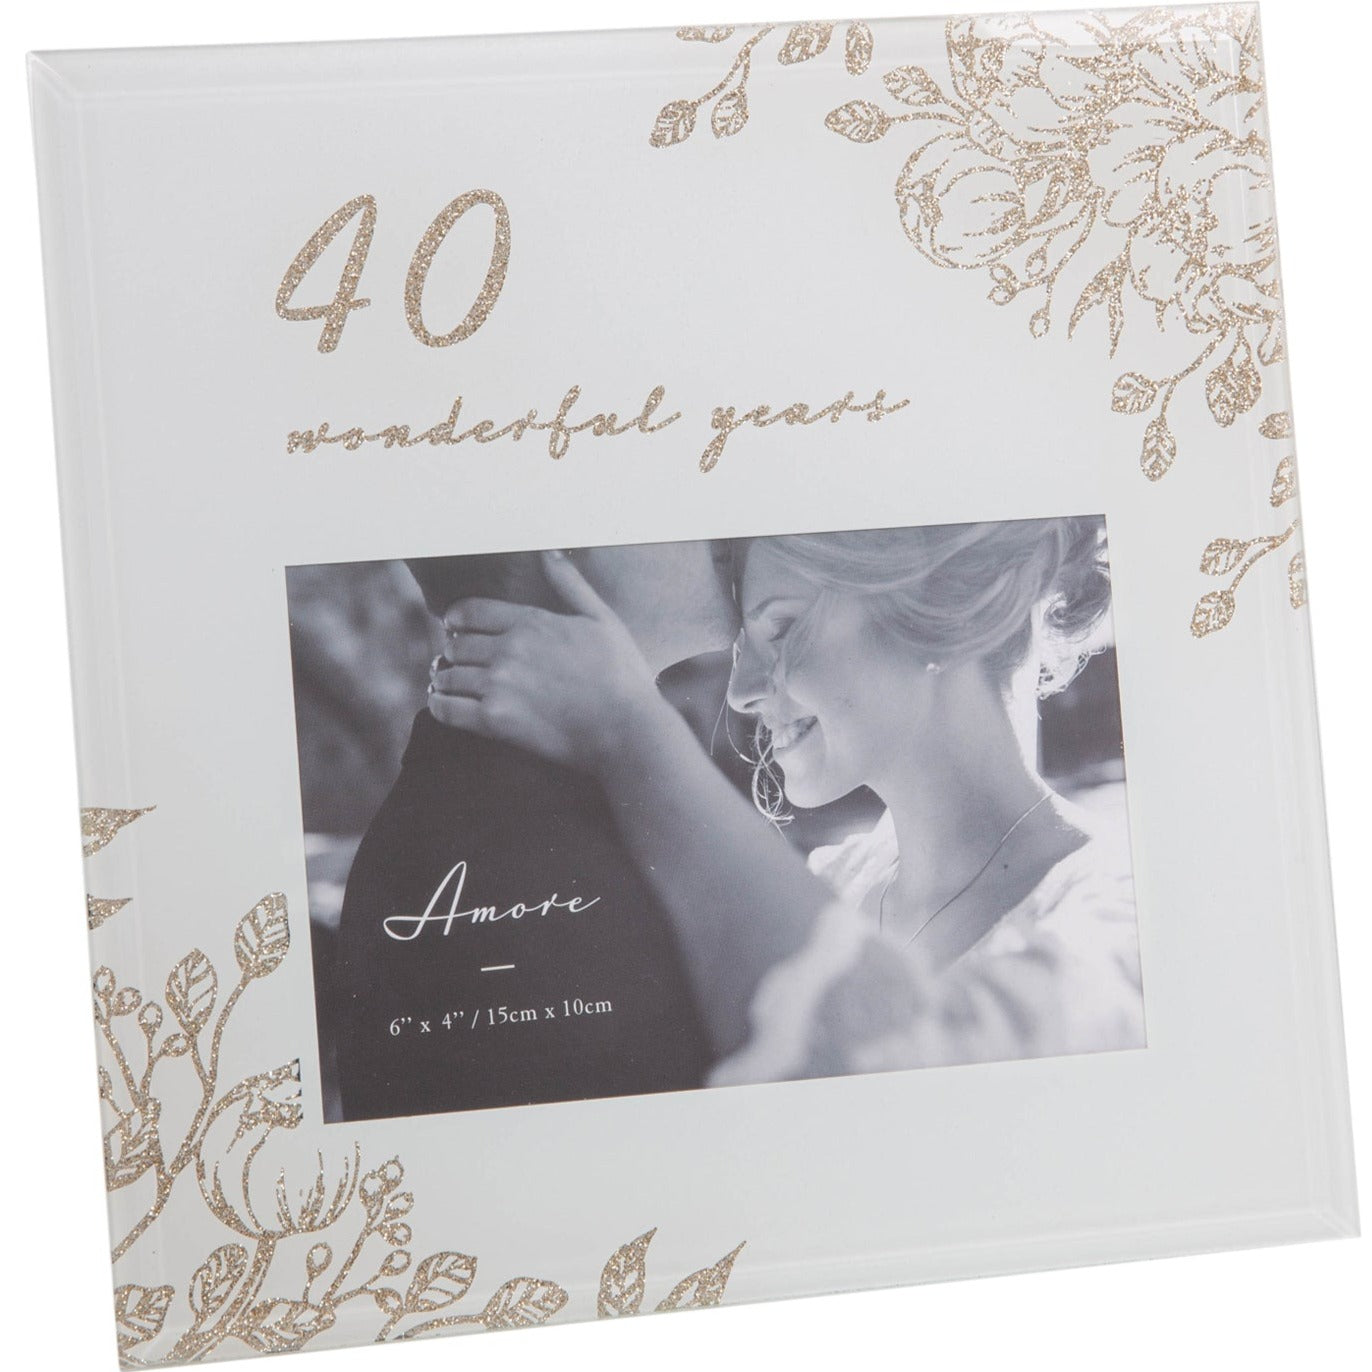 40th Anniversary Photo Frame - 6" x 4" Aperture - Pale Grey Glass Gold Floral